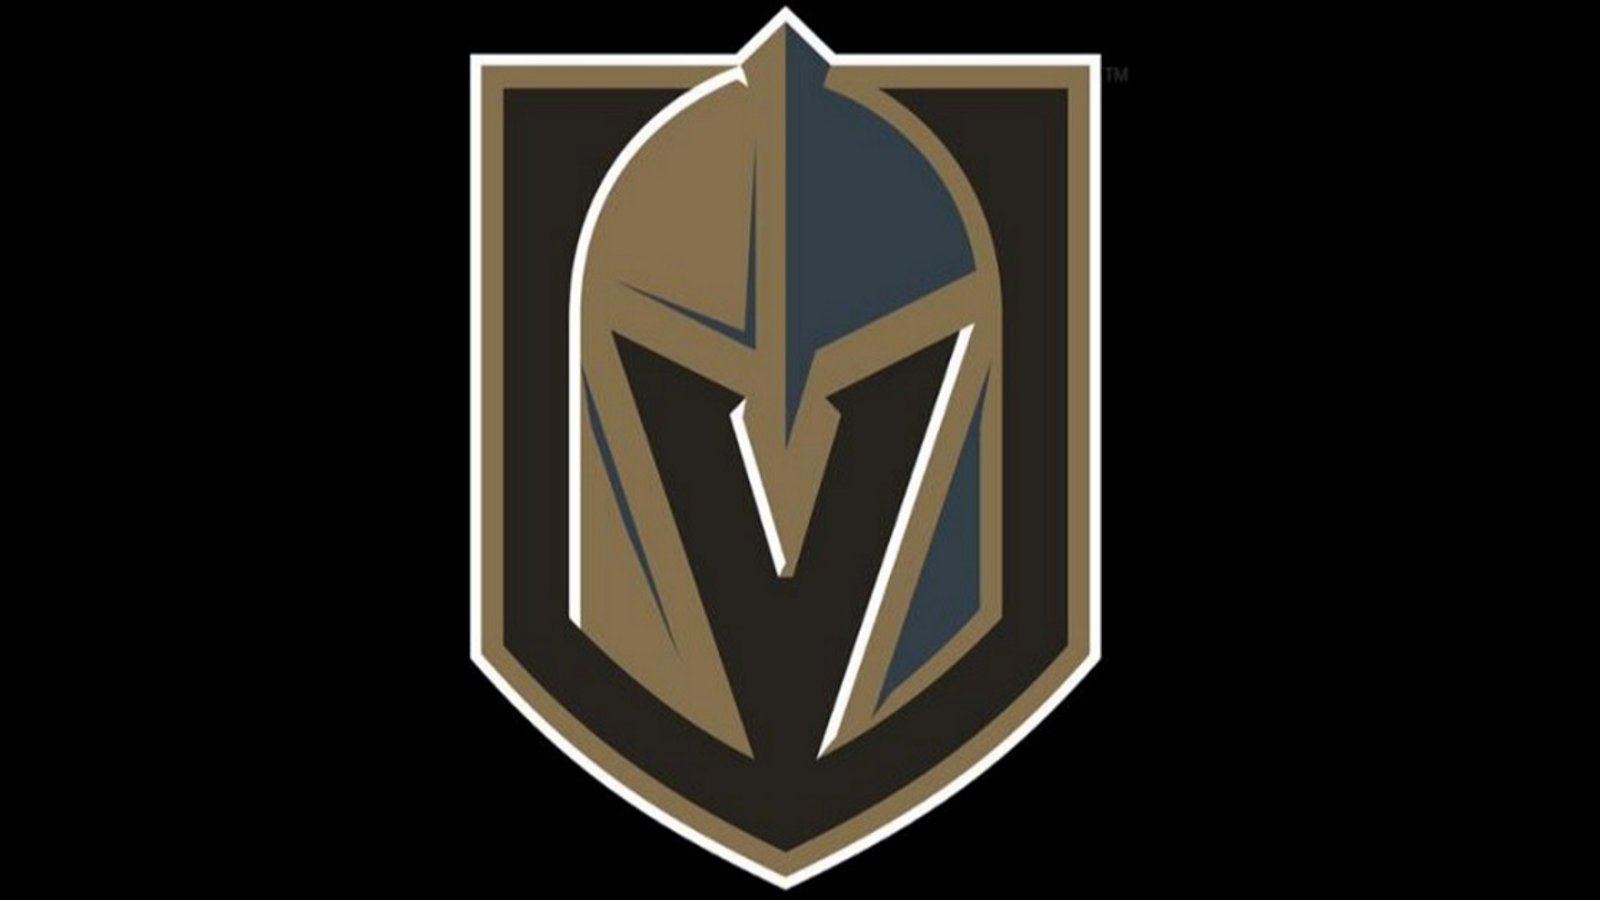 Las Vegas hilariously trolls rival NHL team about the player they are going to take from them.